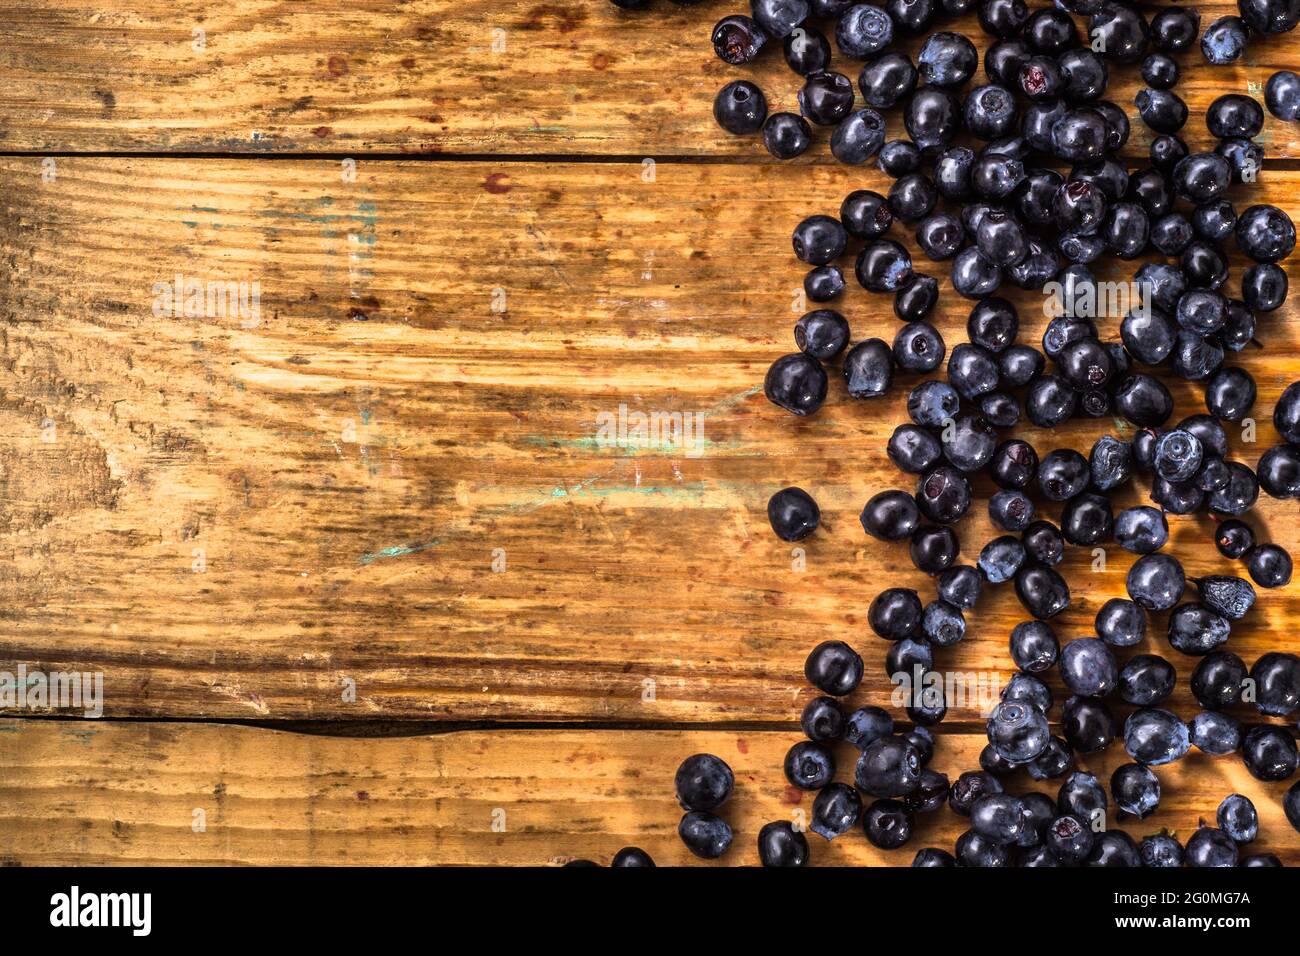 Blueberries picked in forest located on wood background, close-up, background texture Stock Photo